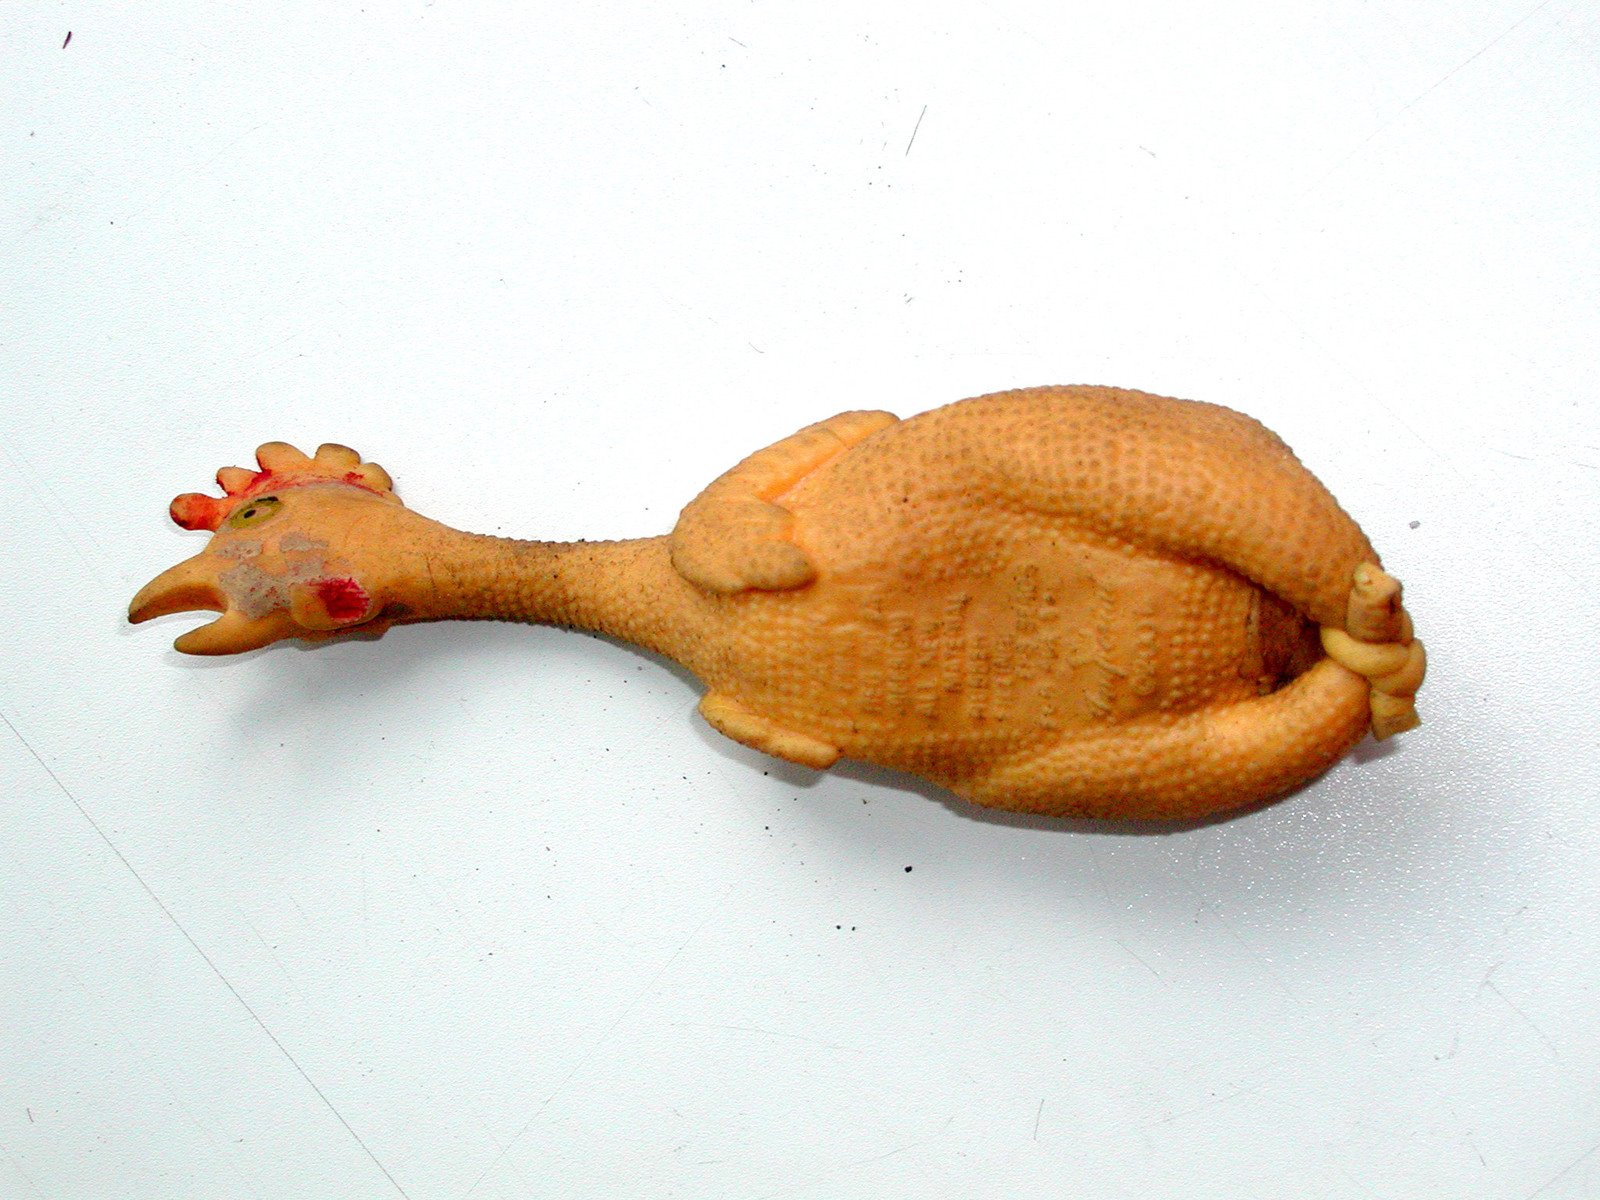 a figurine of an animal laying on a white surface